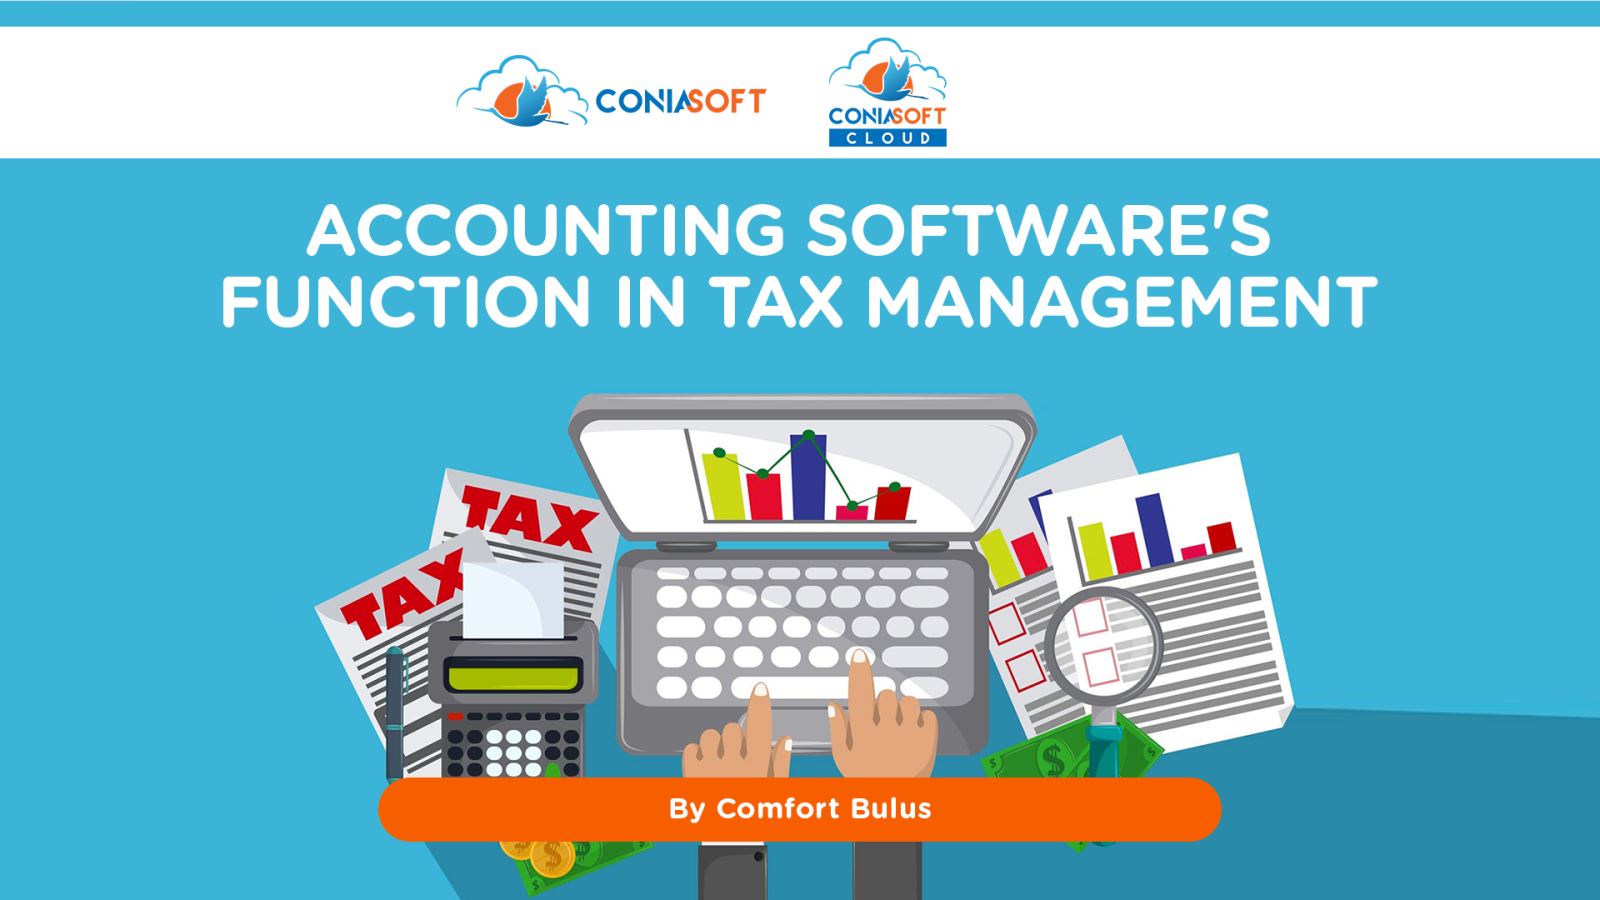 ACCOUNTING SOFTWARE’S FUNCTION IN TAX MANAGEMENT